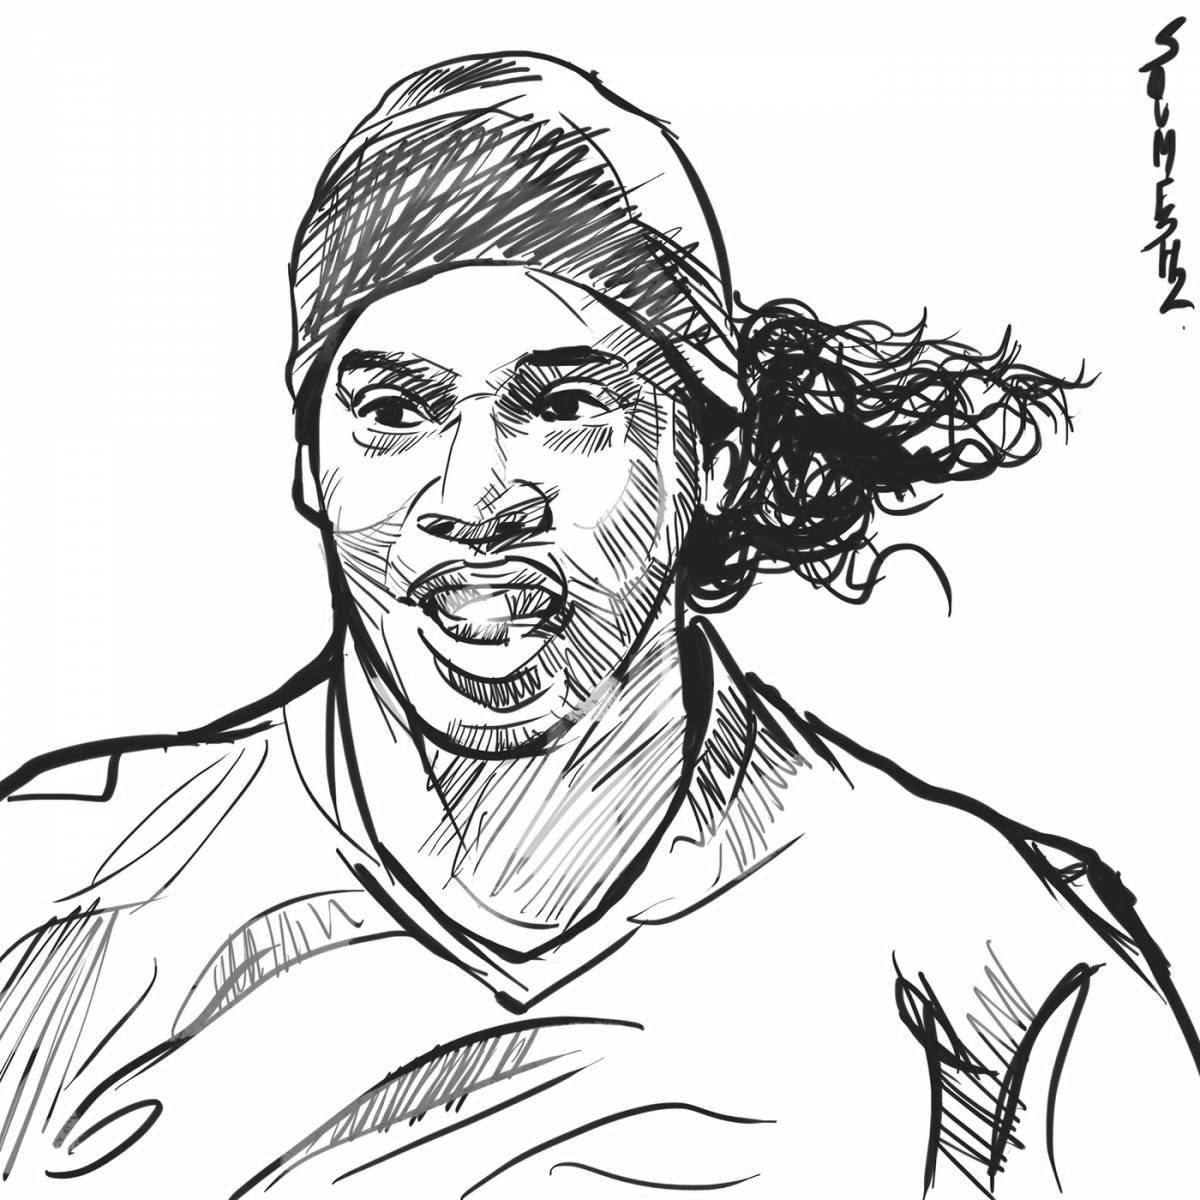 Ronaldinho's exciting coloring book